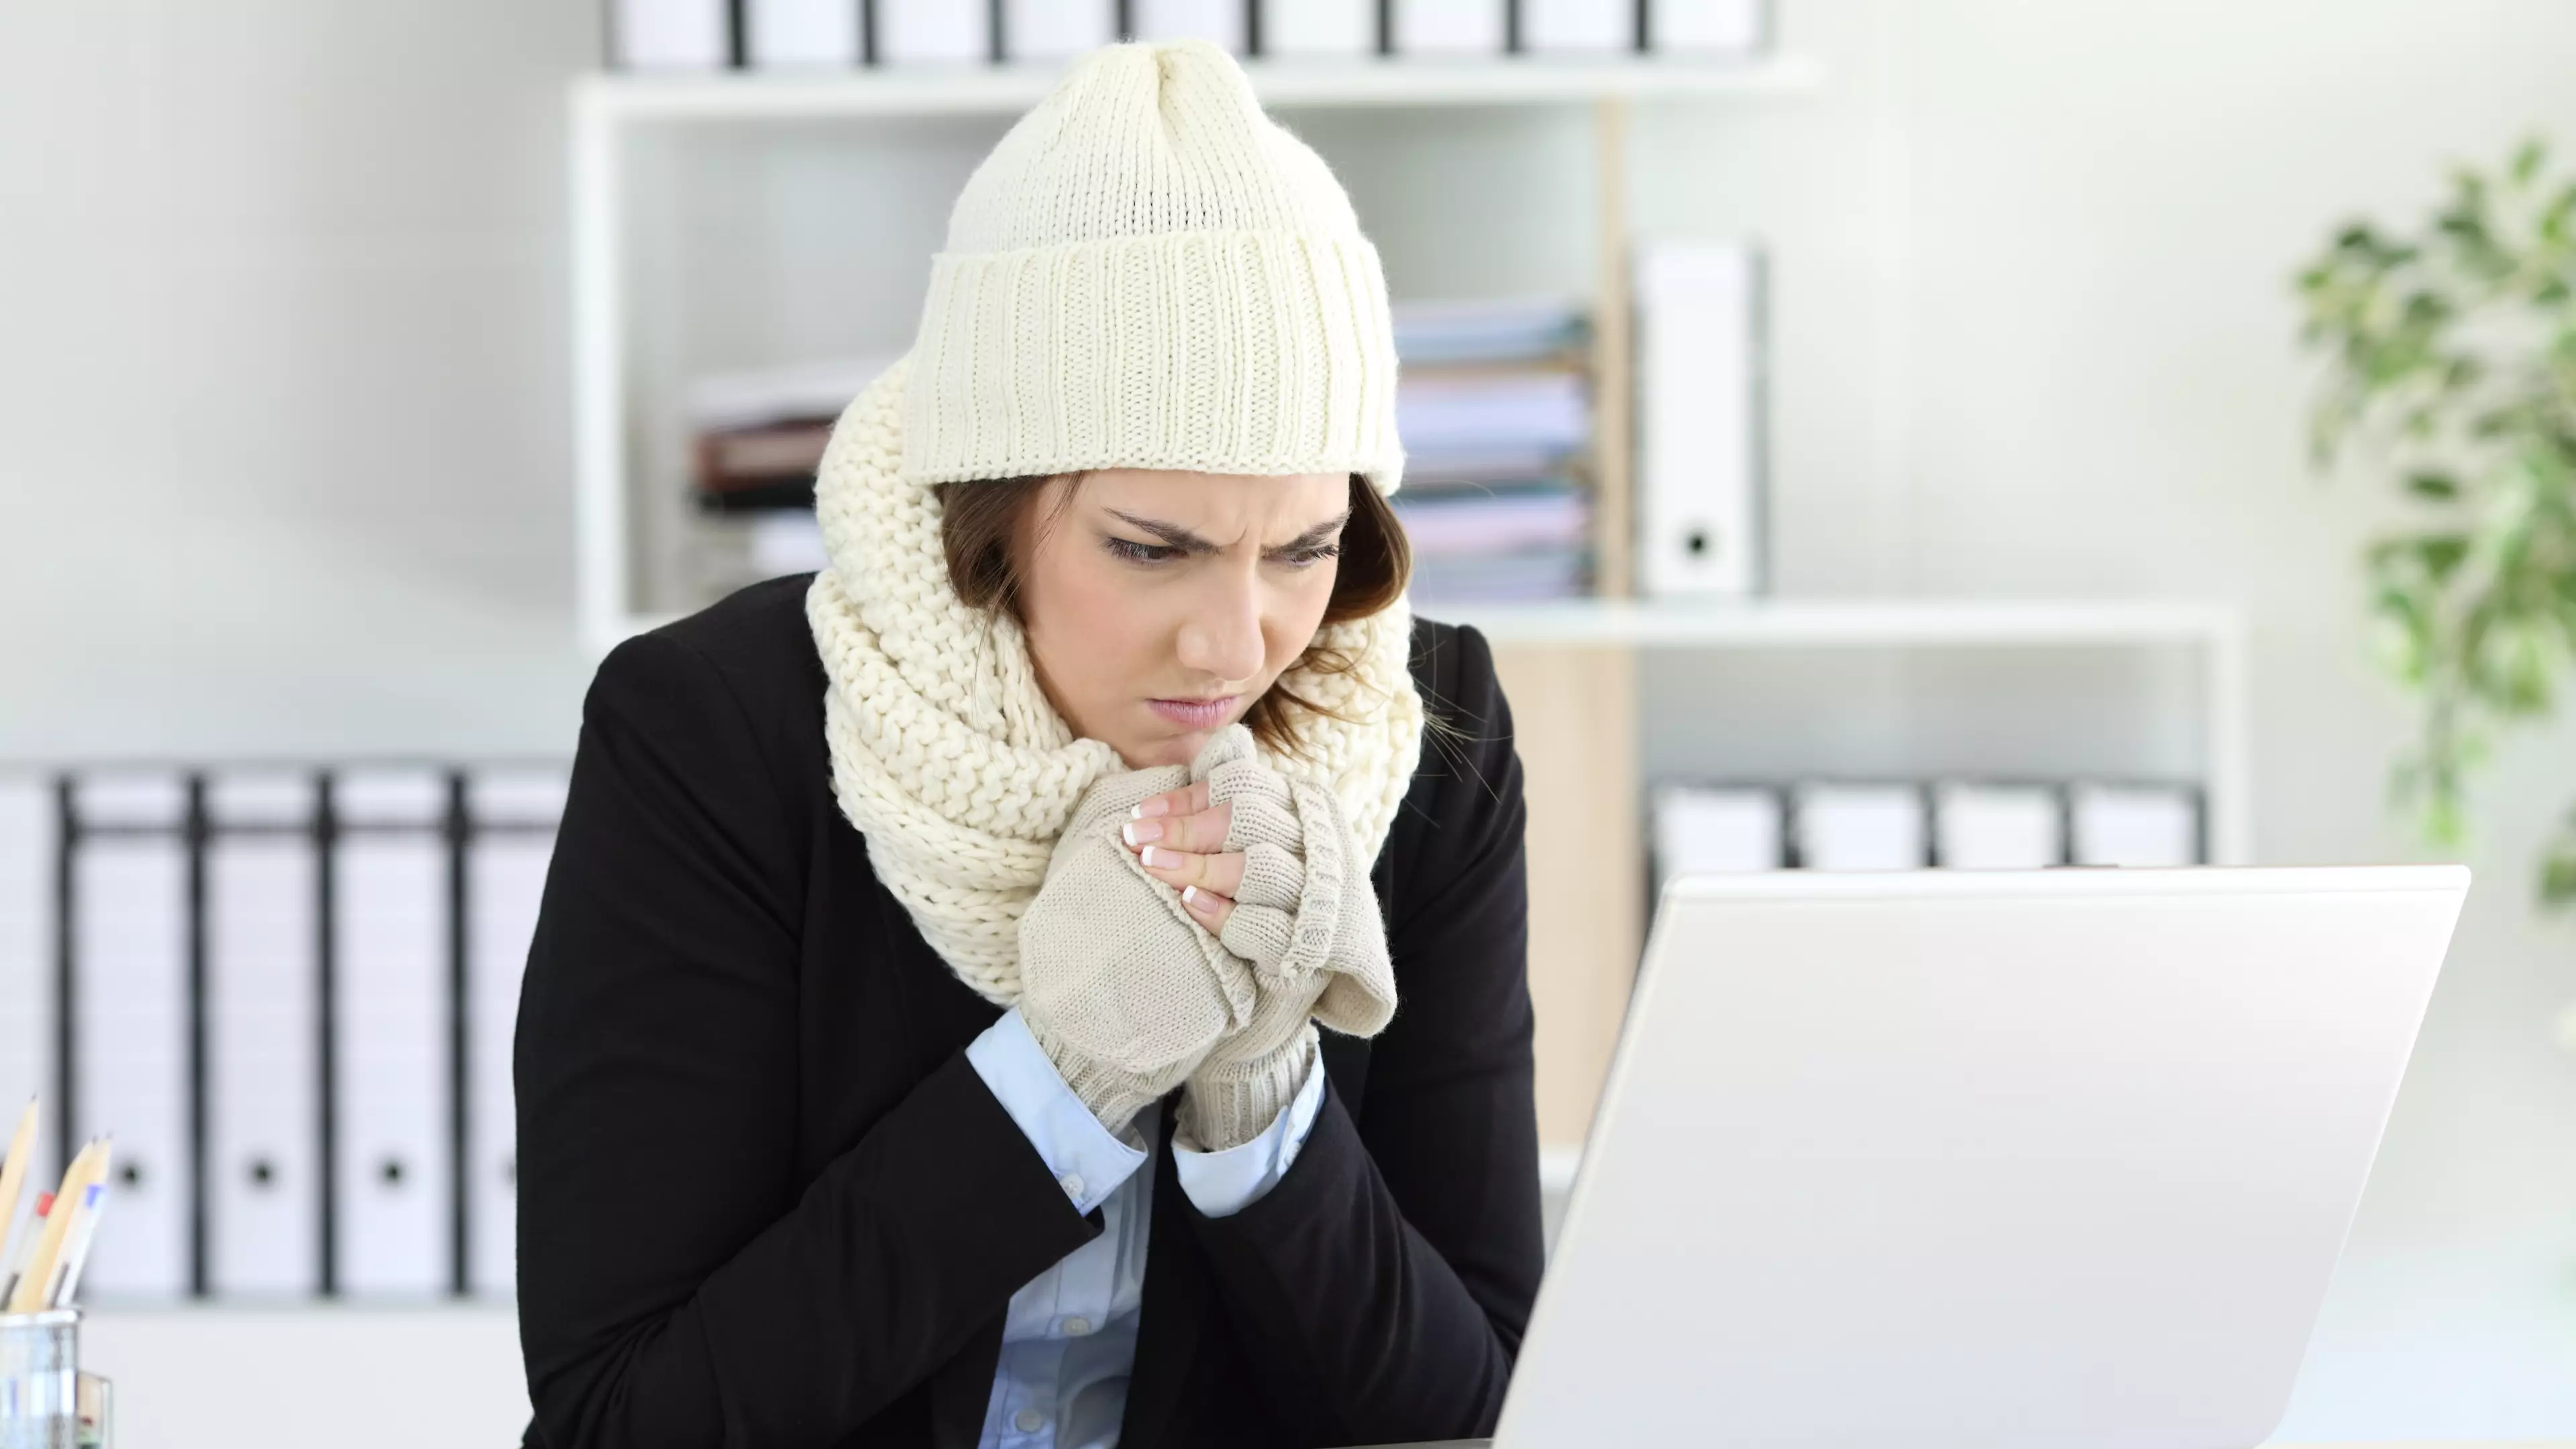 Science Proves Women Perform Worse In Chilly Work Environments